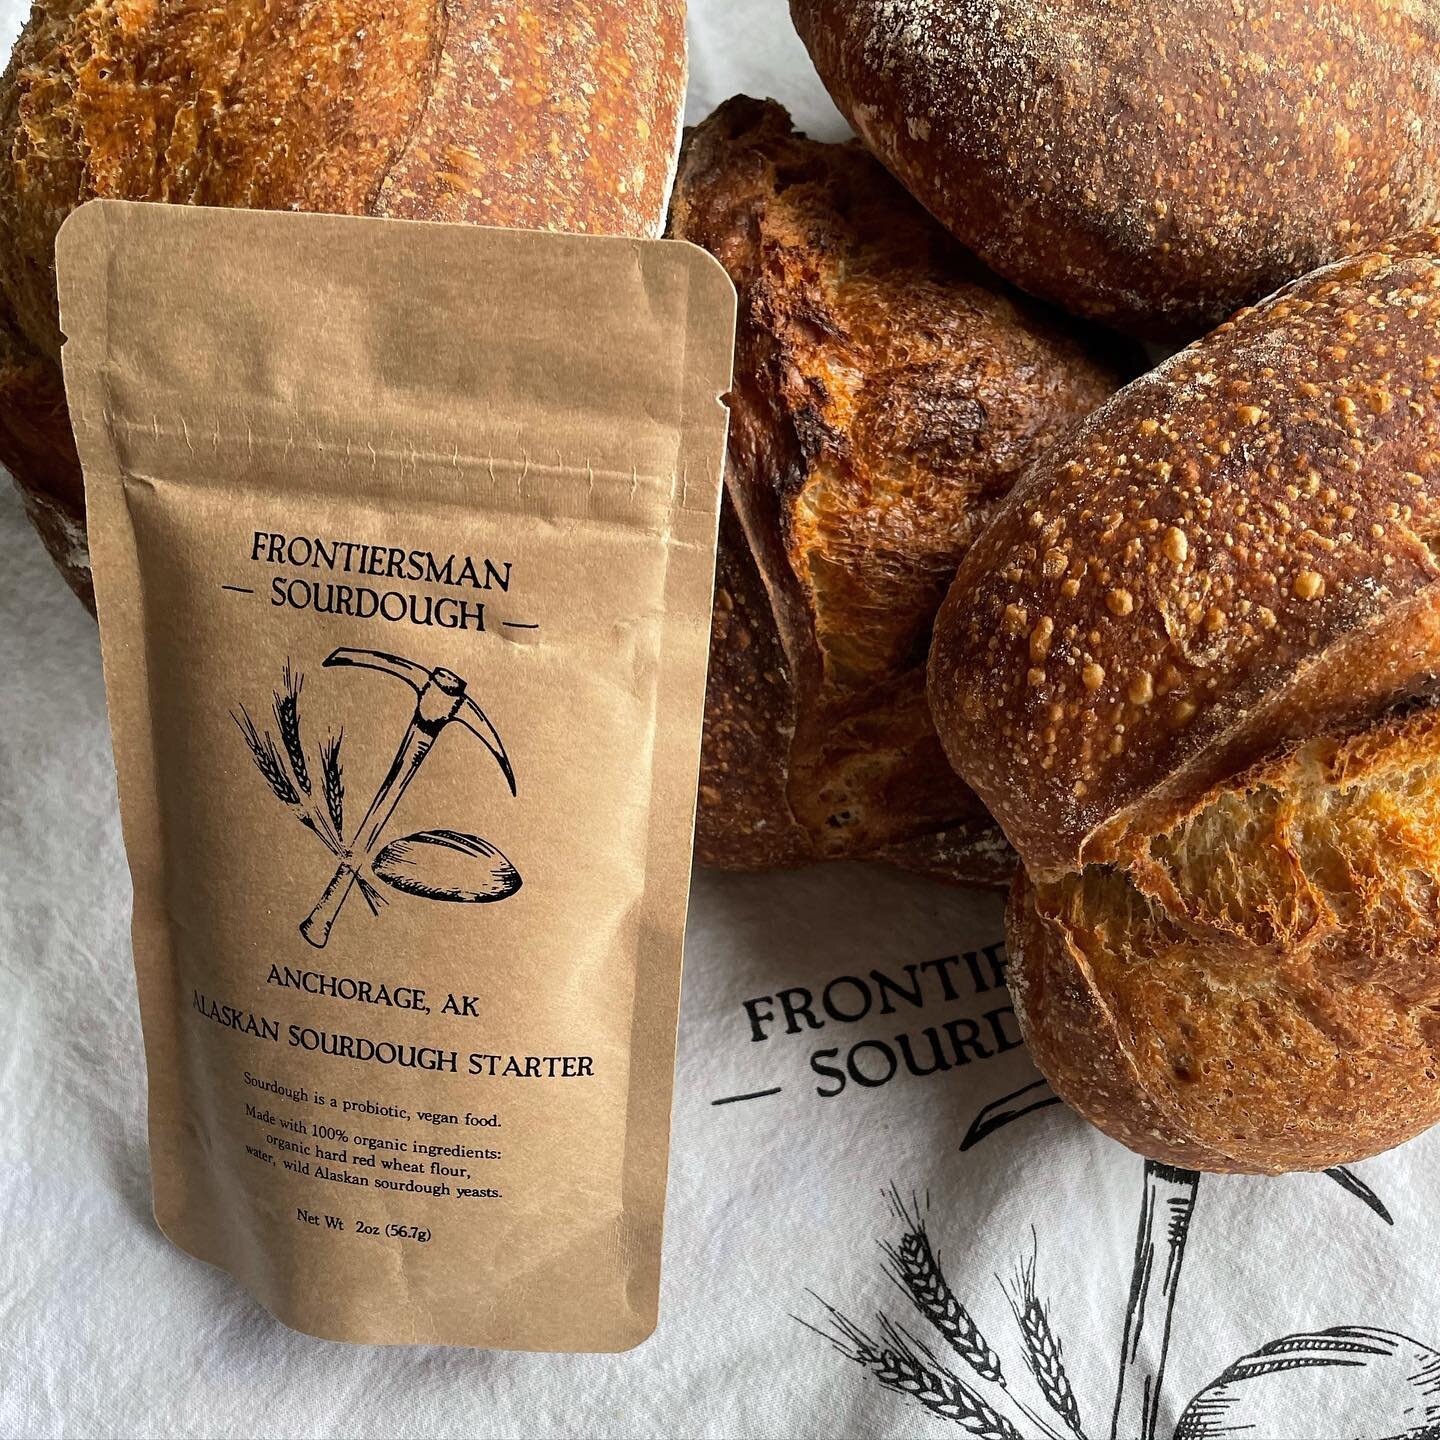 Buy one pouch, never need to buy another, make unlimited bread forever, and pass down your starter through generations. 
.
I know, great business model 🙄😂.
.
Sustainably Made in Alaska with 100% organic ingredients
.
Packaged in biodegradable pouch